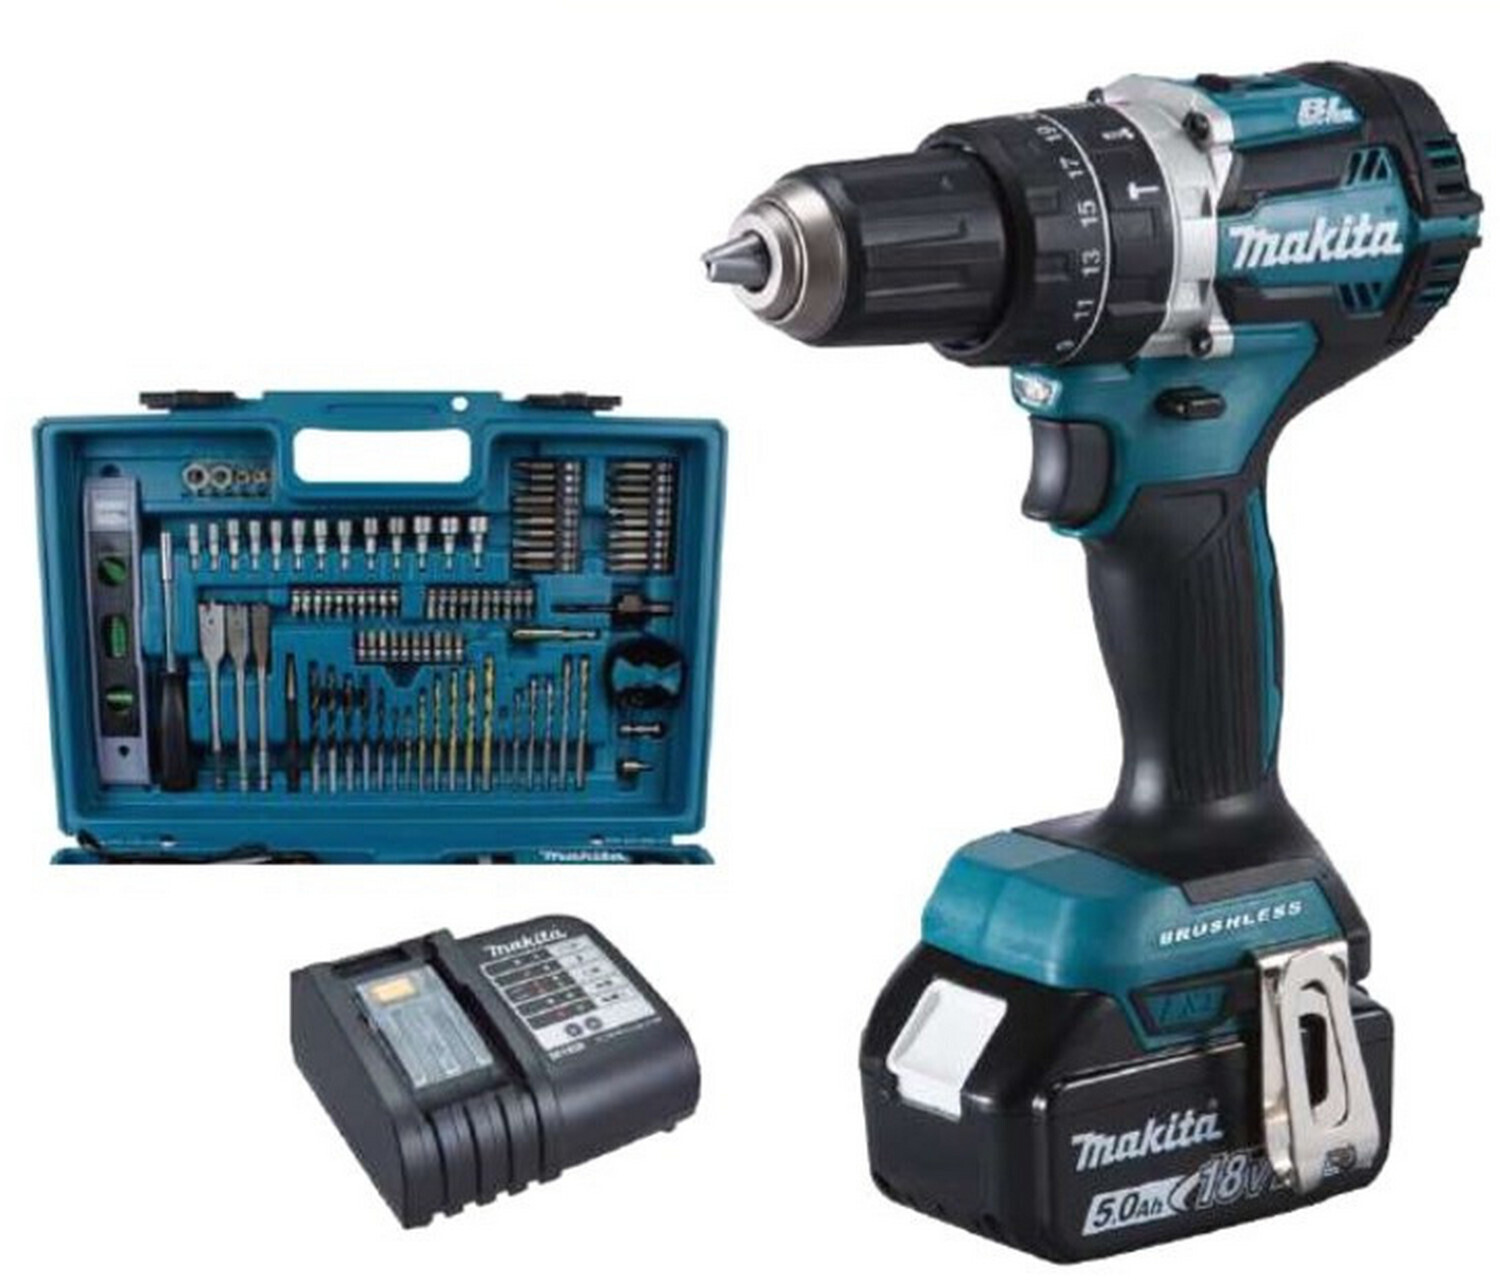 Buy Makita from £198.95 (Today) – Best Deals on